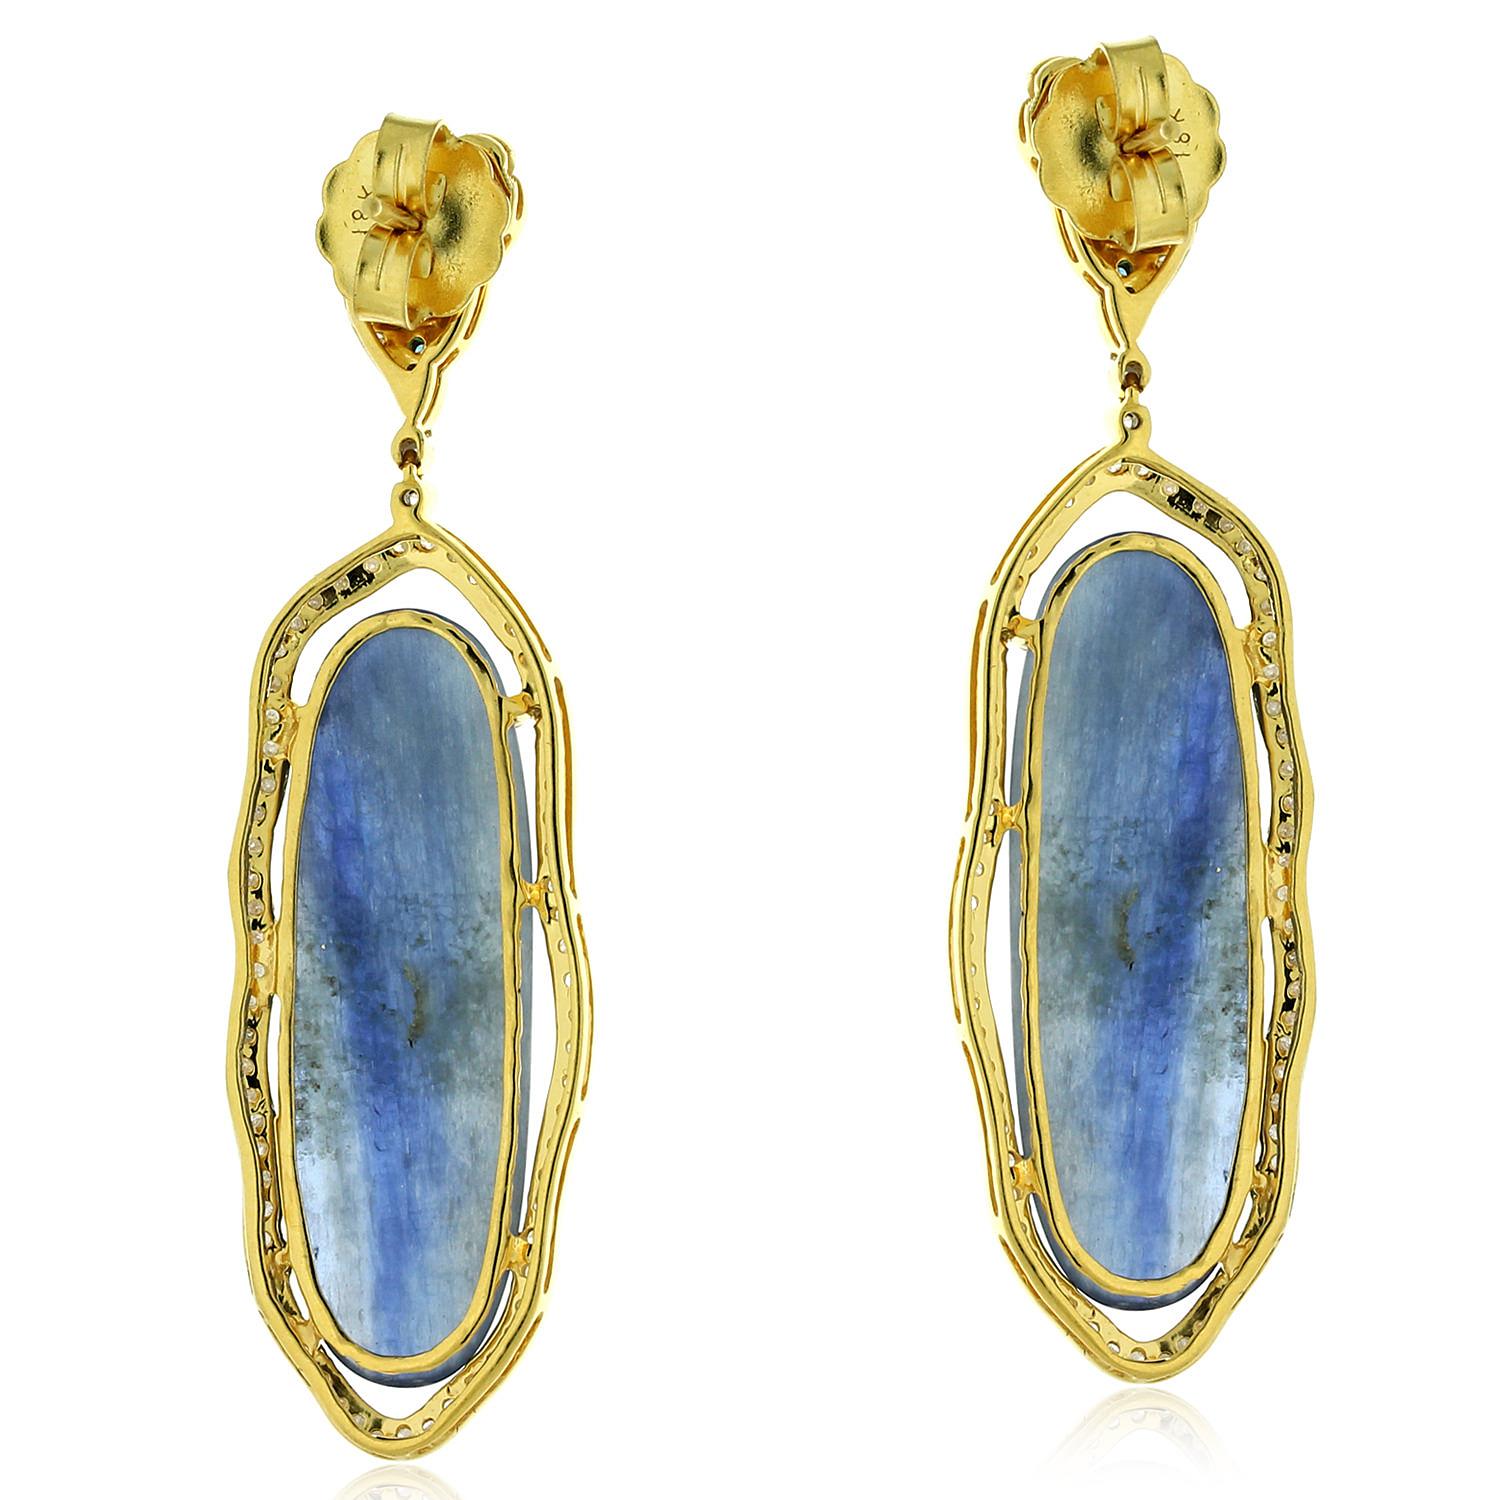 These beautiful drop earring are handcrafted in 18-karat gold. It is set in 28.65 carats Kyanite and 1.72 carats of glimmering diamonds.

FOLLOW  MEGHNA JEWELS storefront to view the latest collection & exclusive pieces.  Meghna Jewels is proudly